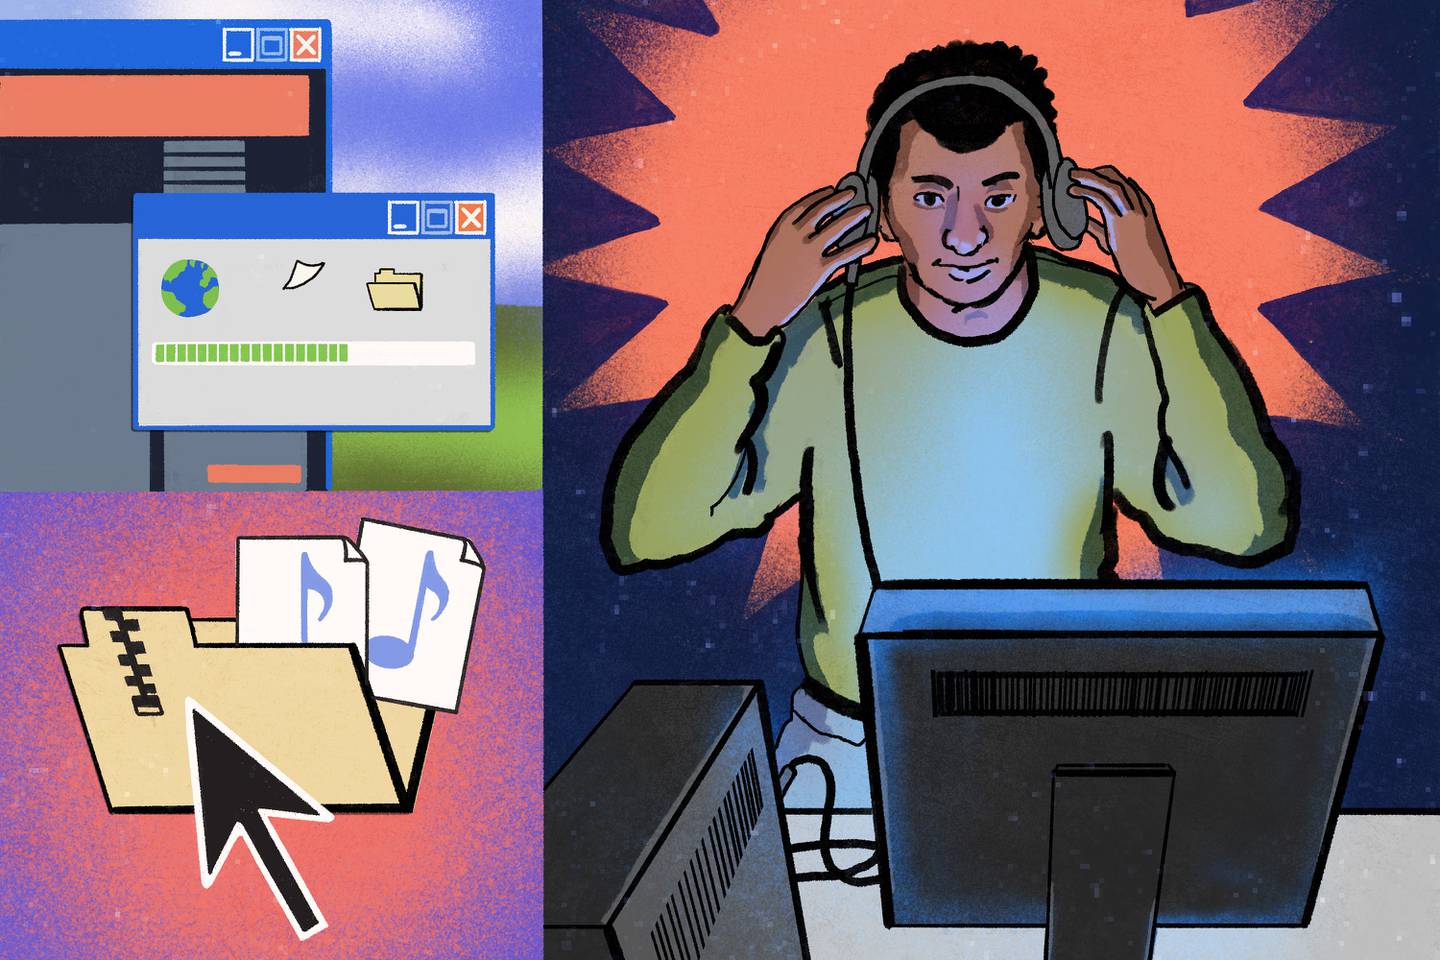 Illustration showing download window, cursor clicking on zip folder with music files, and young man putting on headphones plugged into mid-2000s era desktop computer.